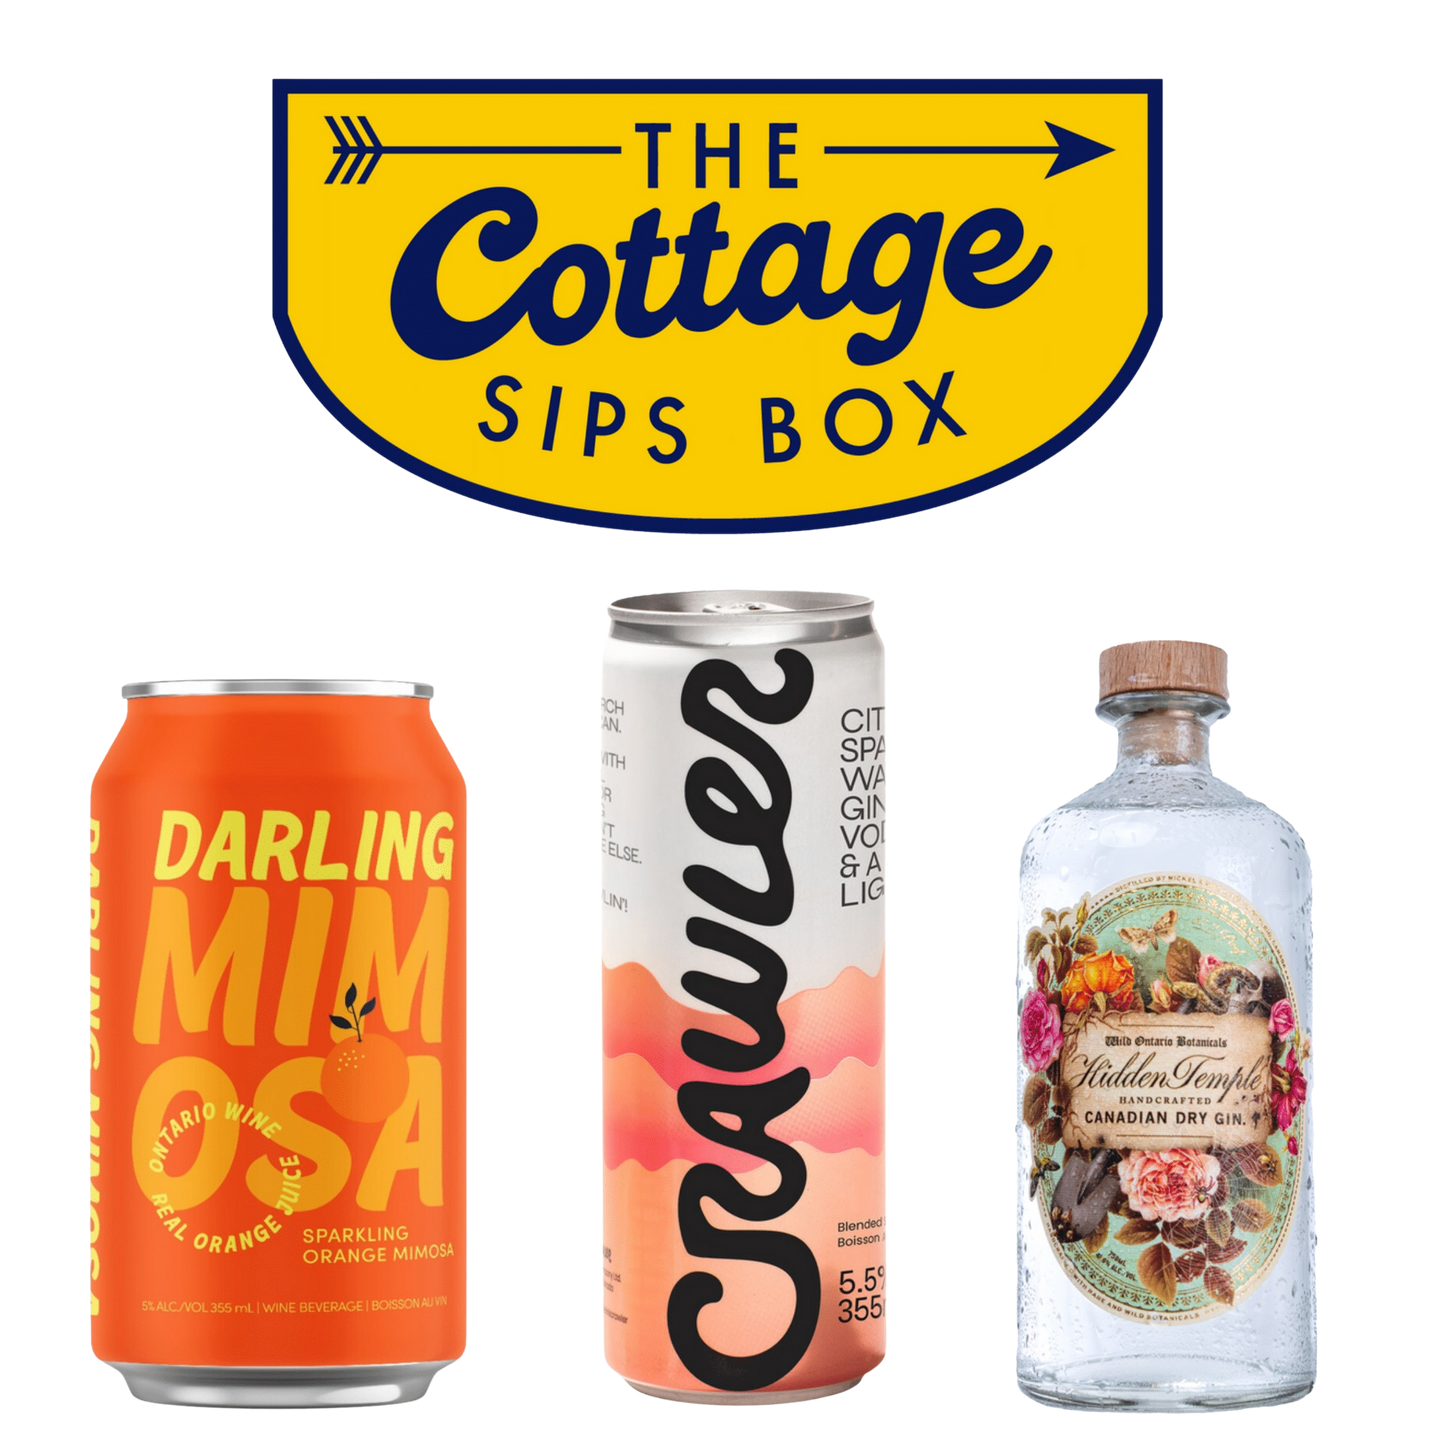 The Cottage Sips Box